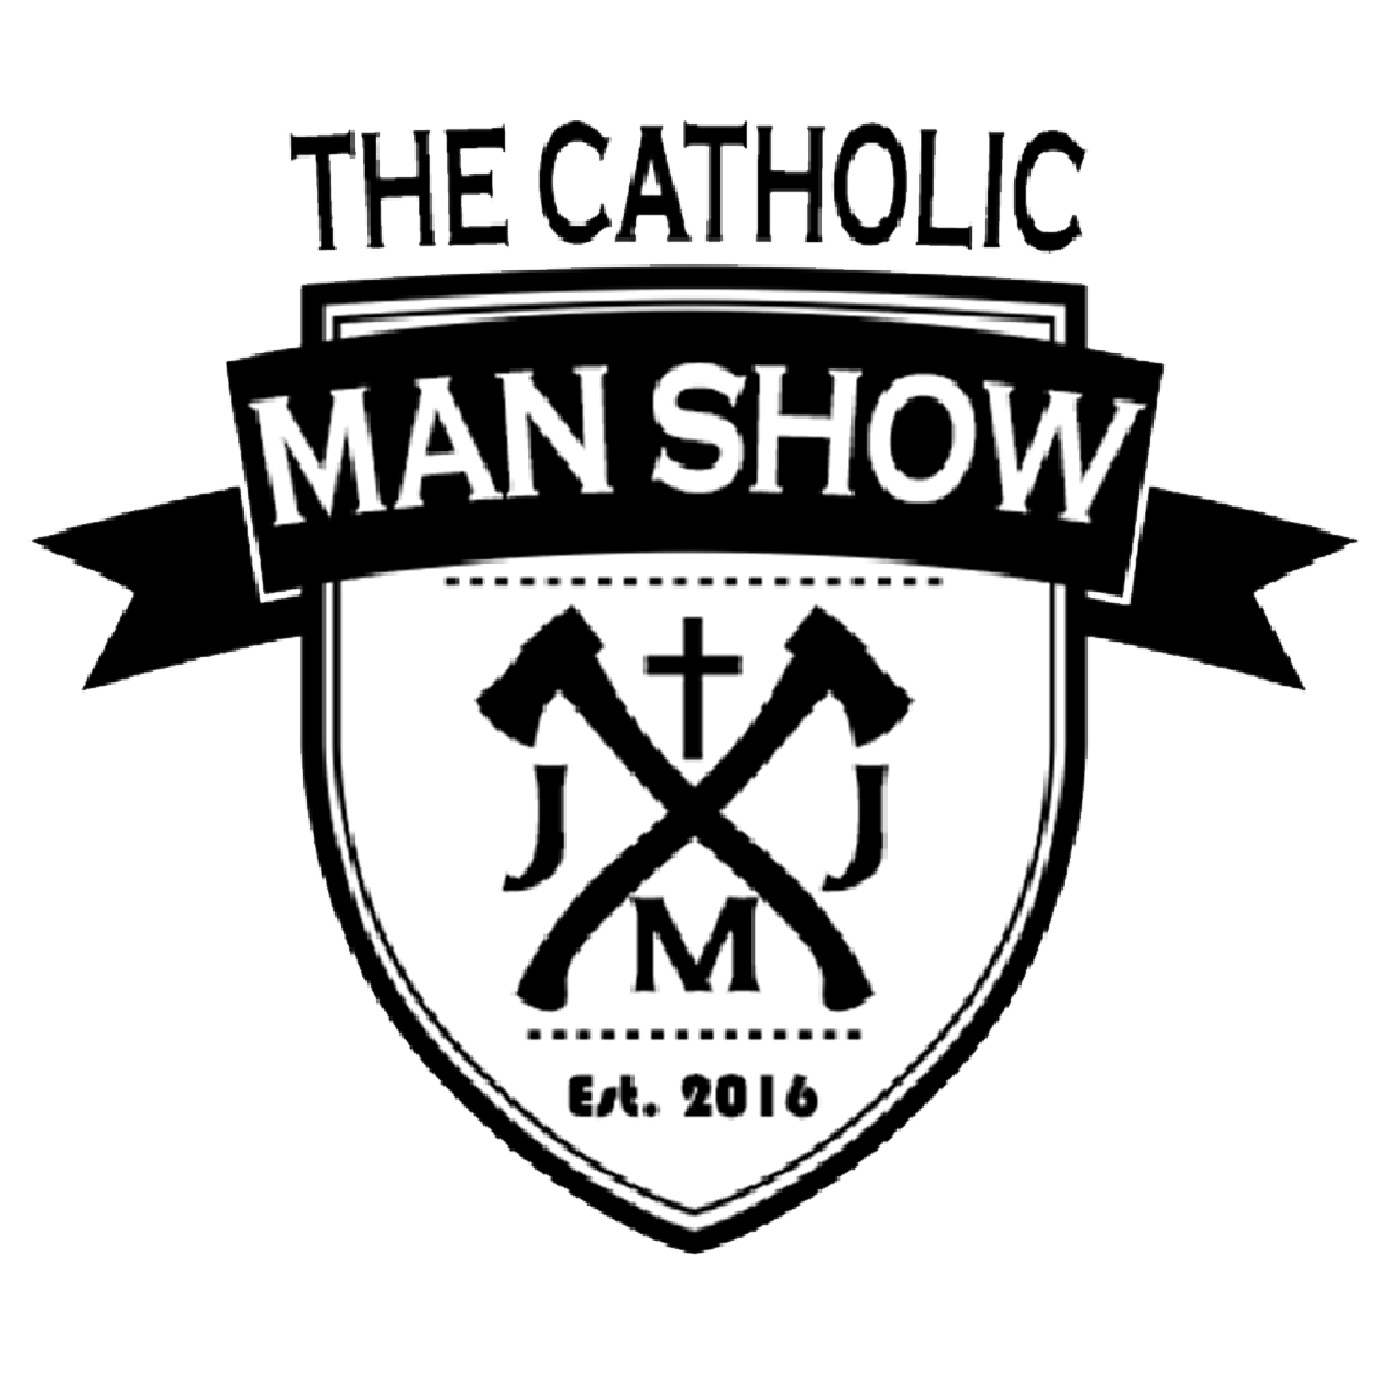 The Catholic Man Show Episode 39 - Knock knock. Who’s there? Jehovah Witnesses